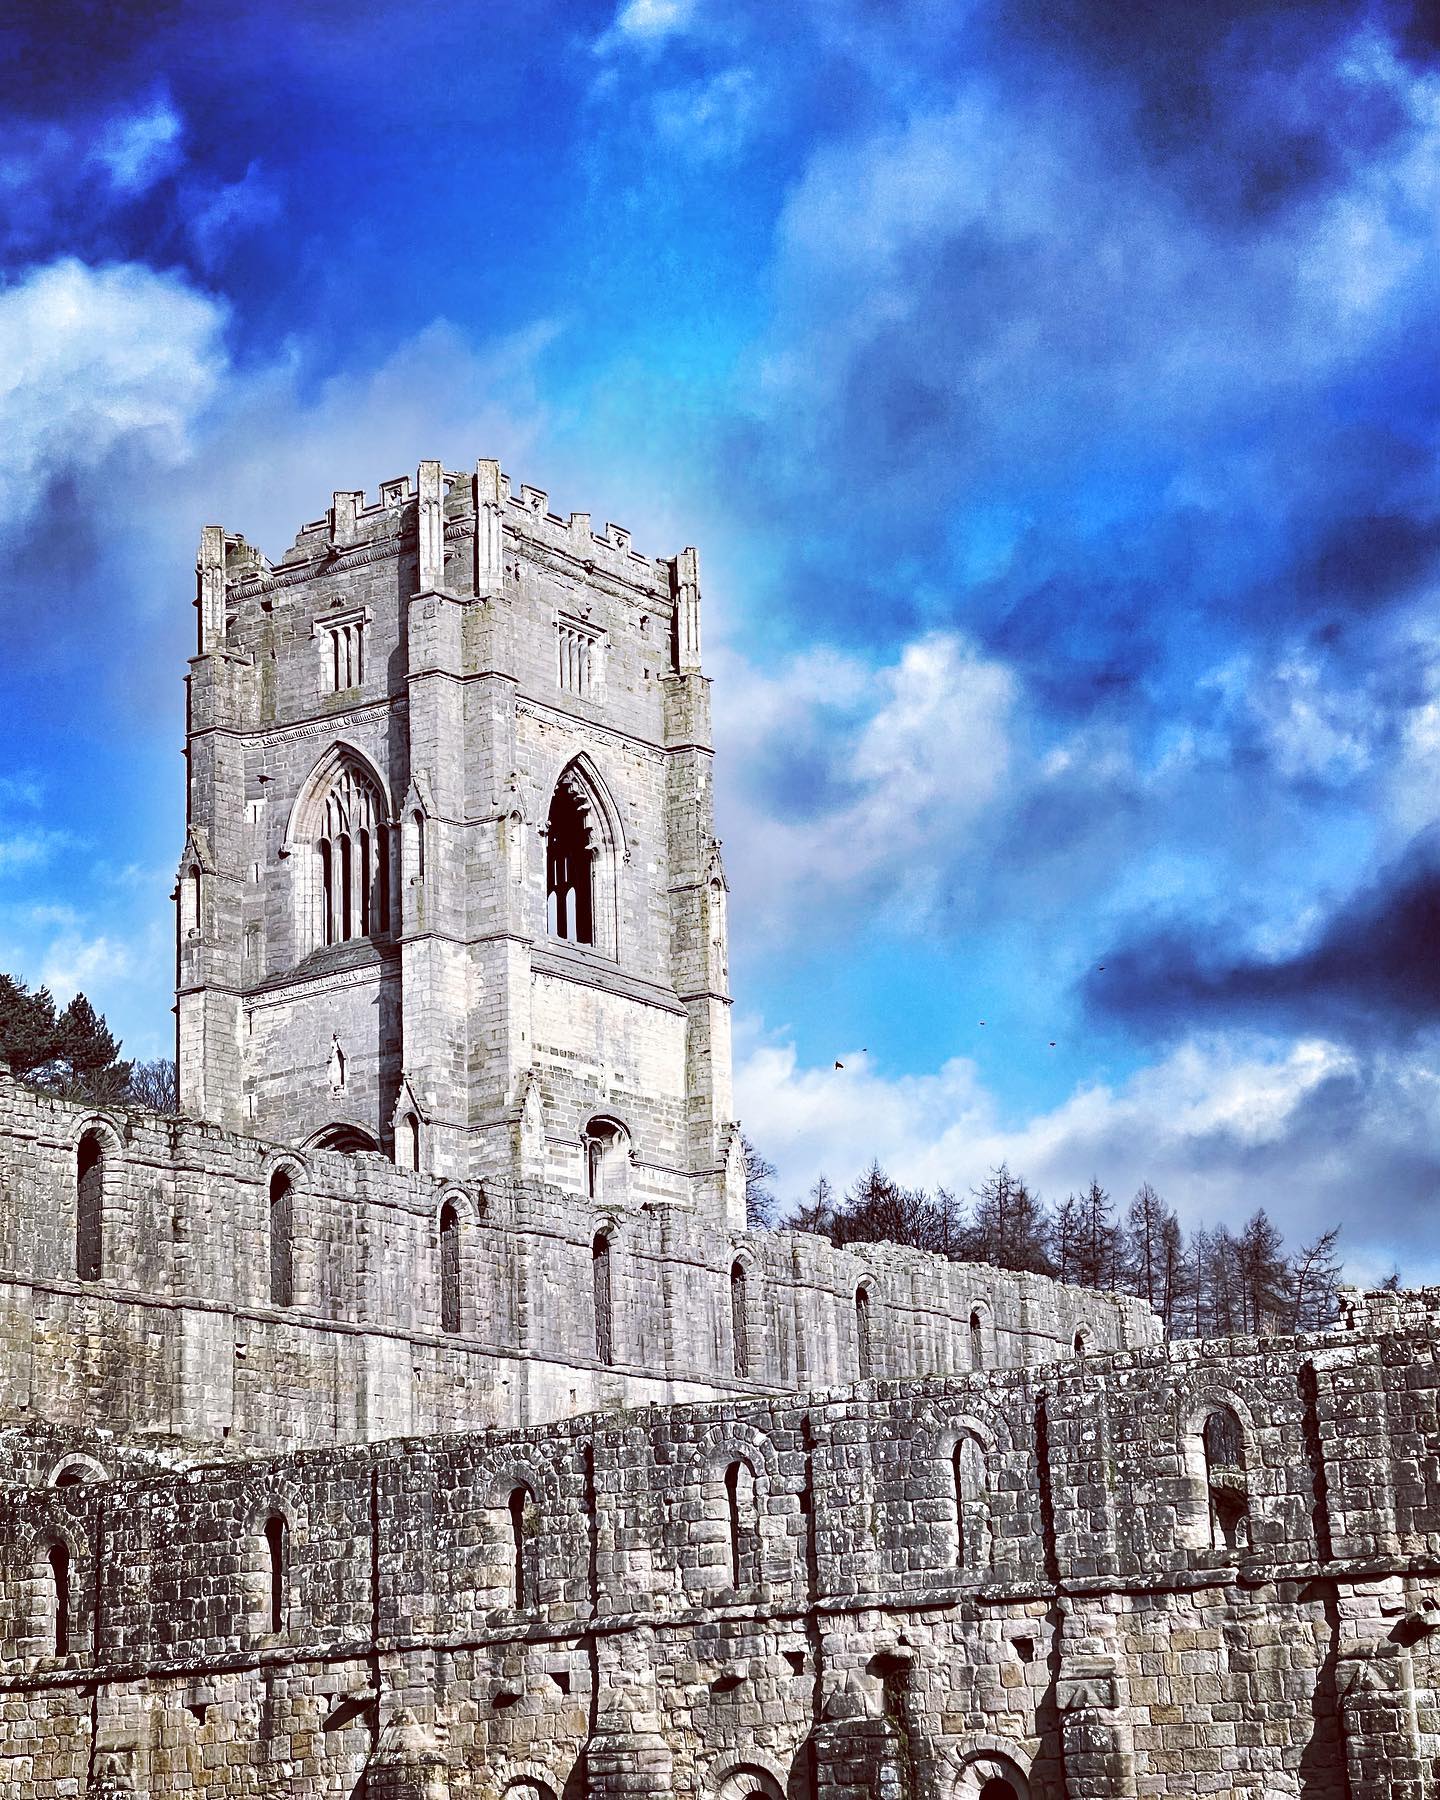 Fountains Abbey

#smlp #iphotography #shotoniphone #fountainsabbey #nationaltrust